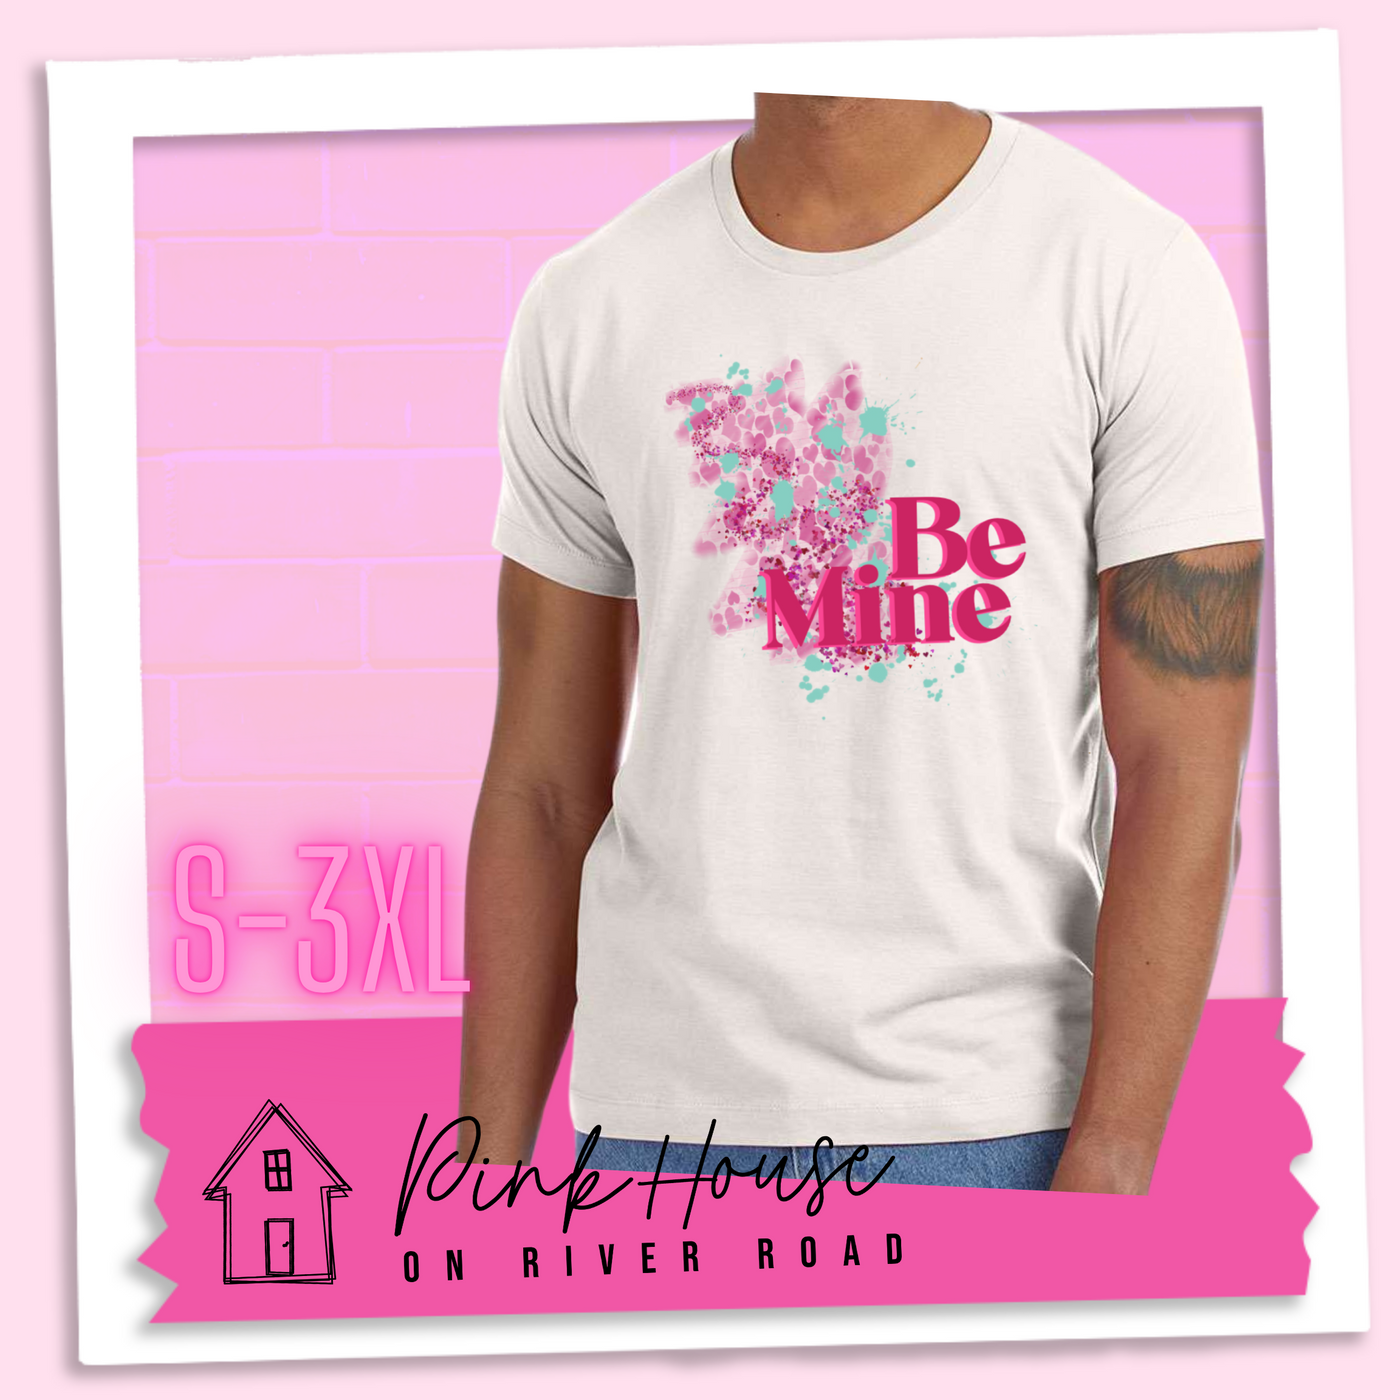 Dust Tee with a squiggle design made of pink hearts and pink sparkles with light teal splatters and pink text at the end of the art that says Be Mine with a hot pink shadow.